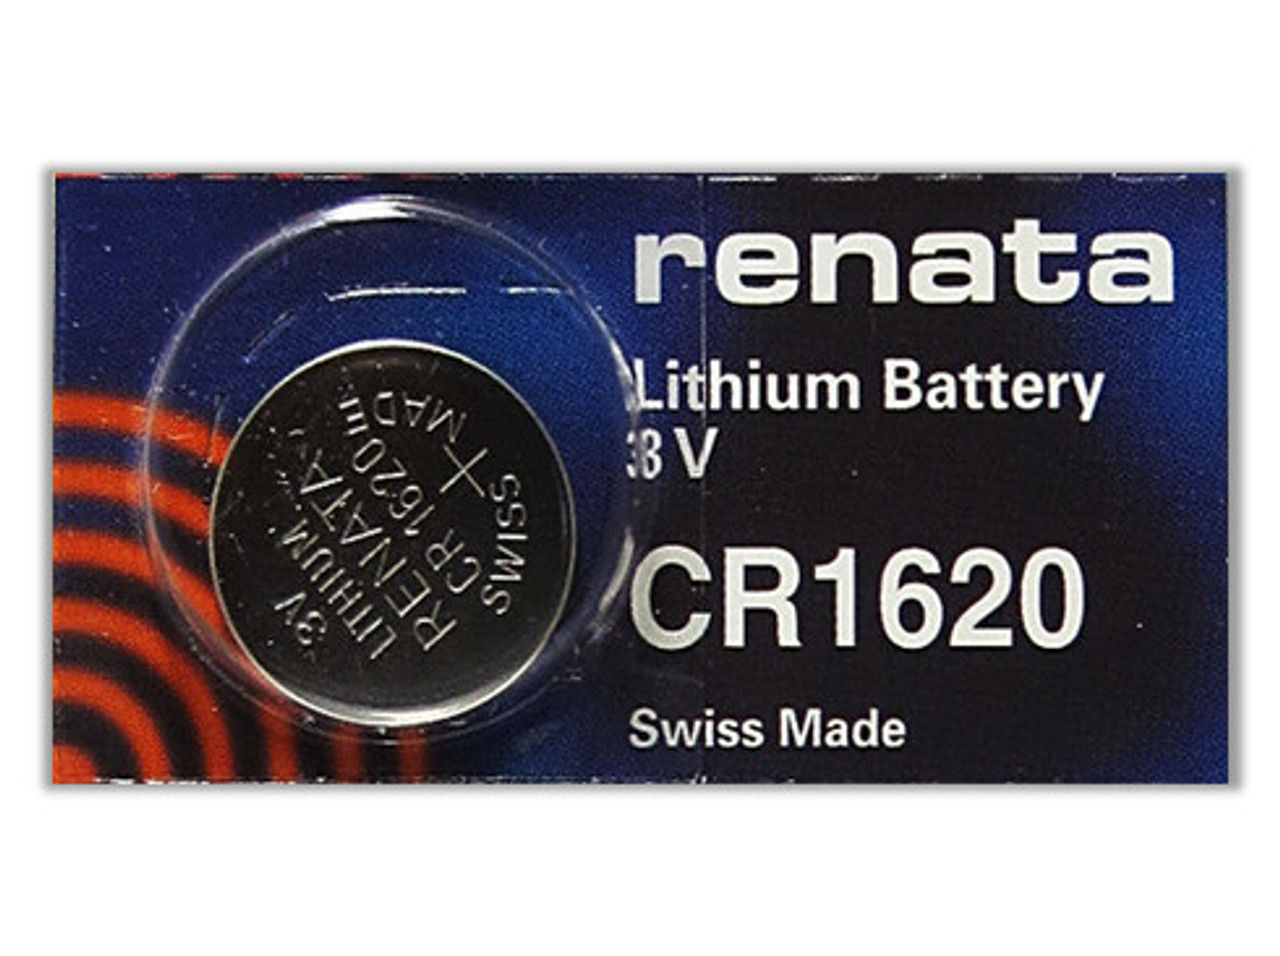 Renata CR1620 3V Lithium Coin Battery - 5 Pack FREE SHIPPING